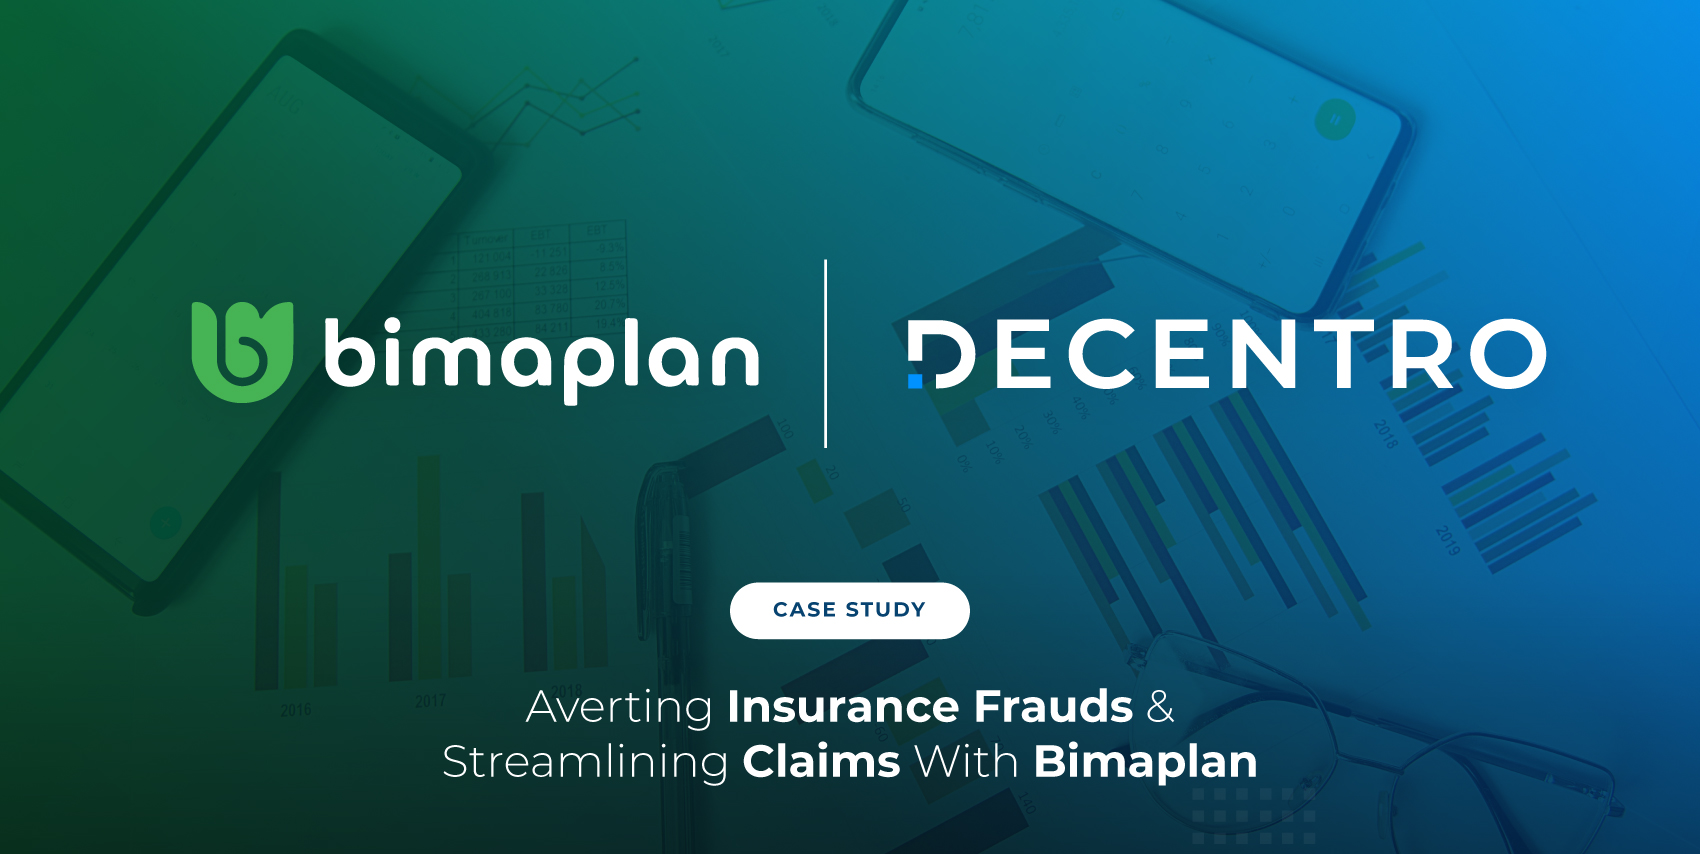 A case study on how BimaPlan, a fast-growing Insurtech startup provides insurance and prevents claim frauds with Decentro.